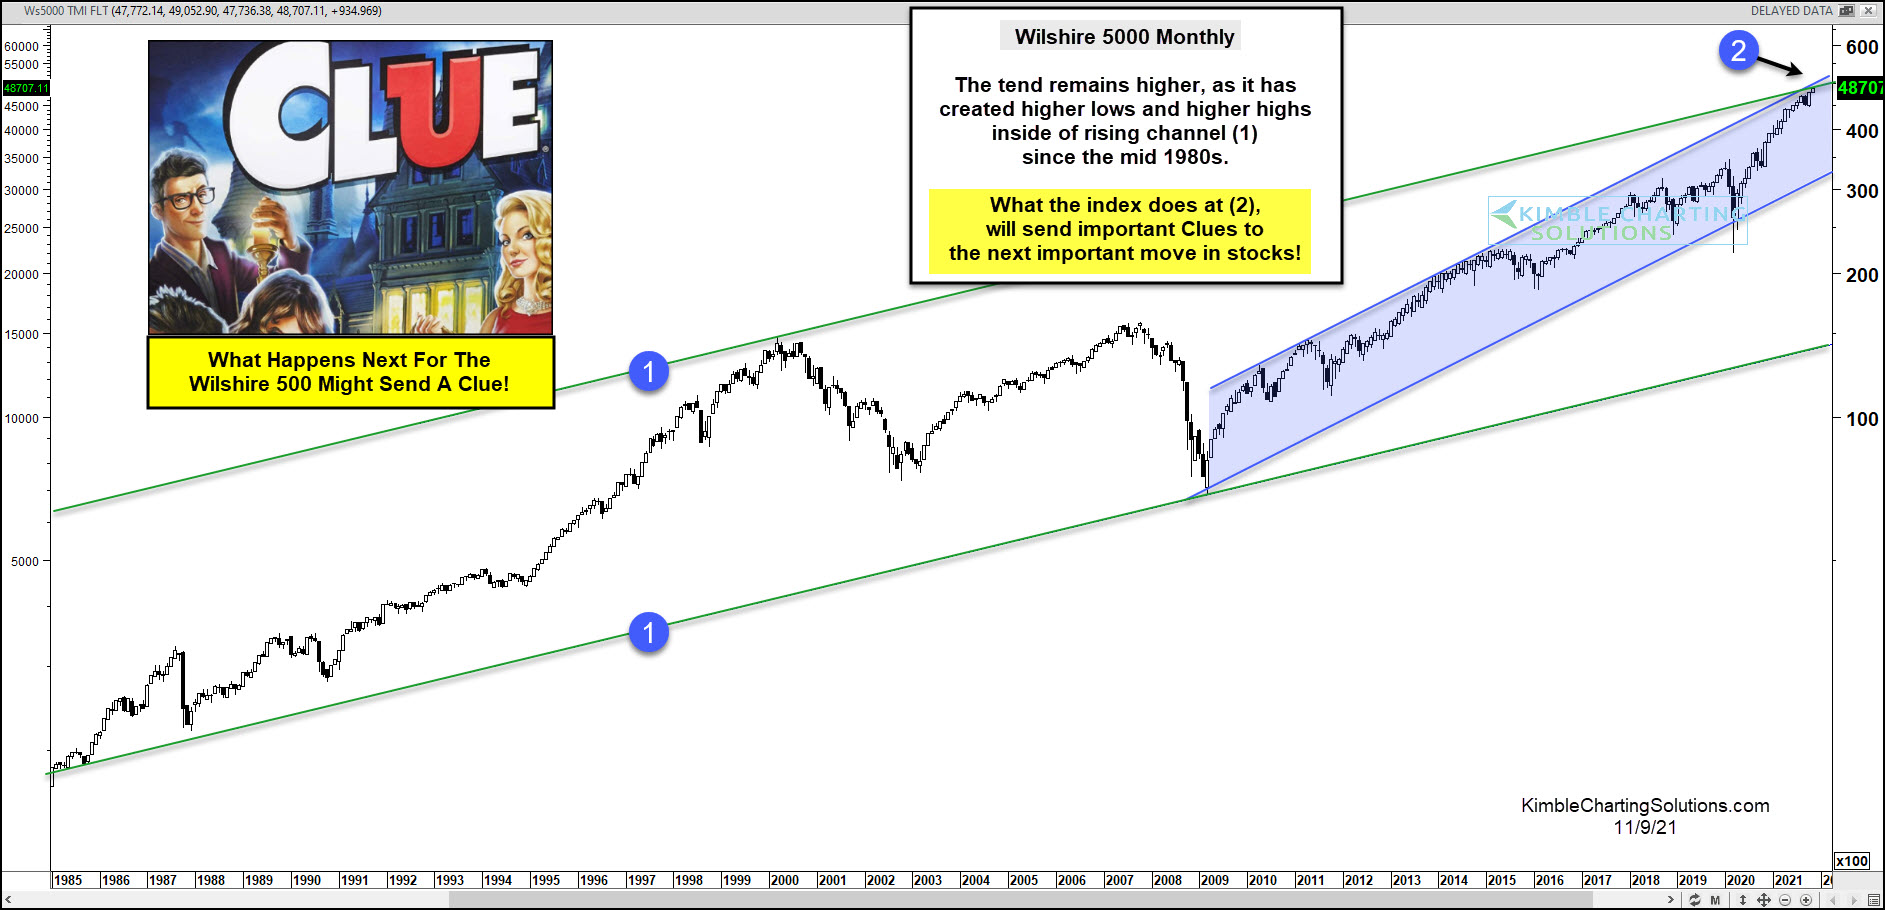 Wilshire 5000 Monthly Chart